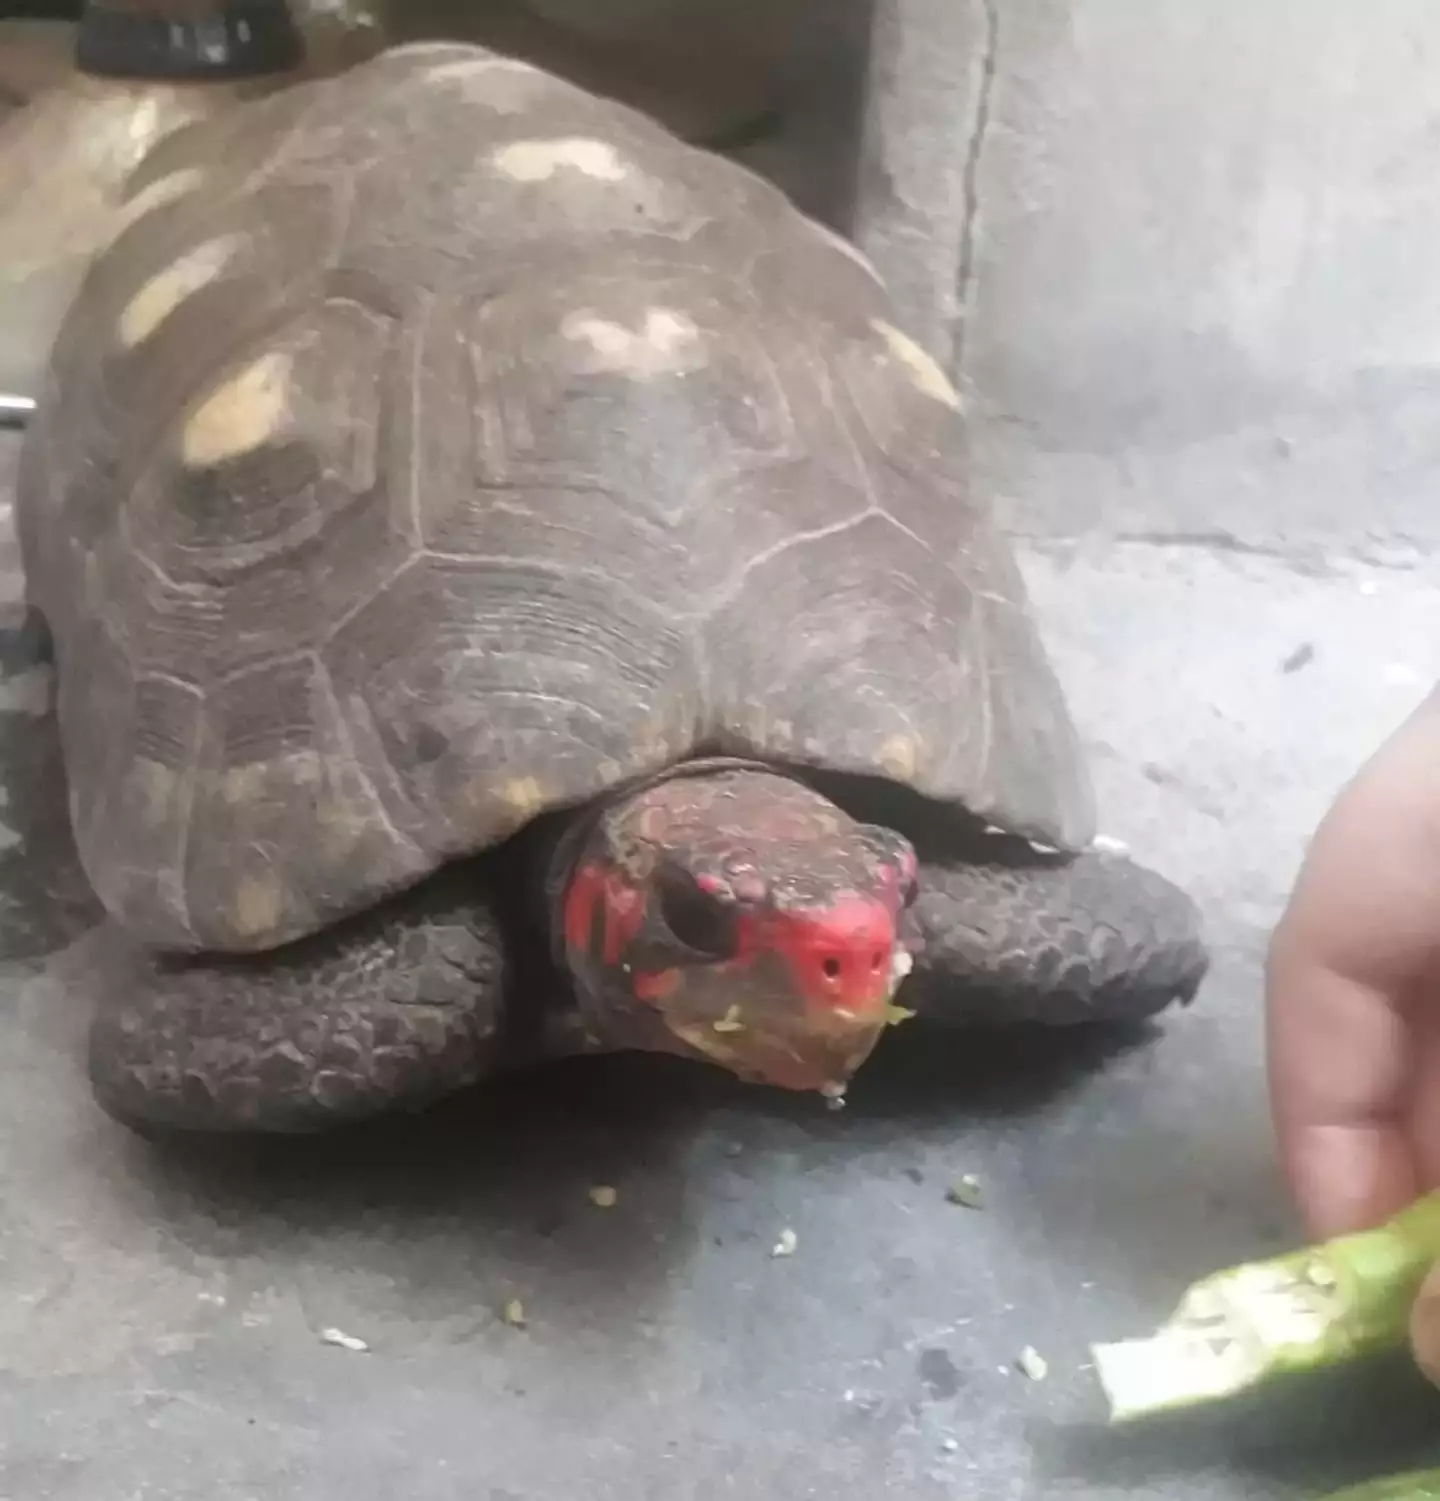 Long-lost tortoise Manuela was found in the attic 30 years later.